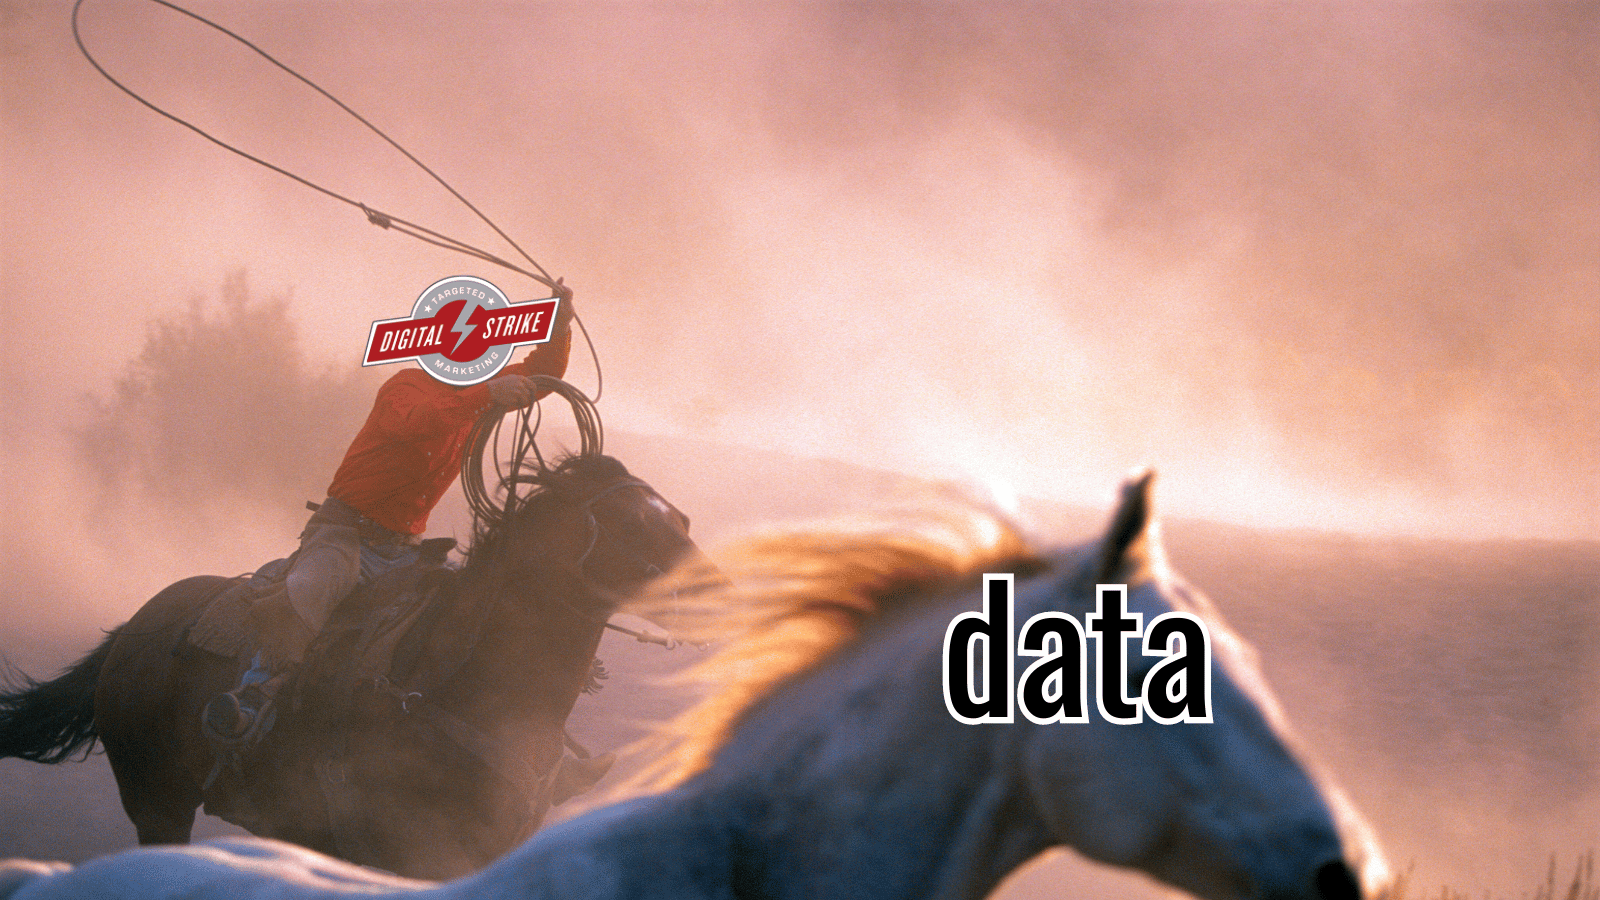 A cowboy with the Digital Strike - Targeted Marketing logo overtop his face lassos a wild horse. The word "data" overlays the wild horse's face. Represents the concept of pulling data from various sources.